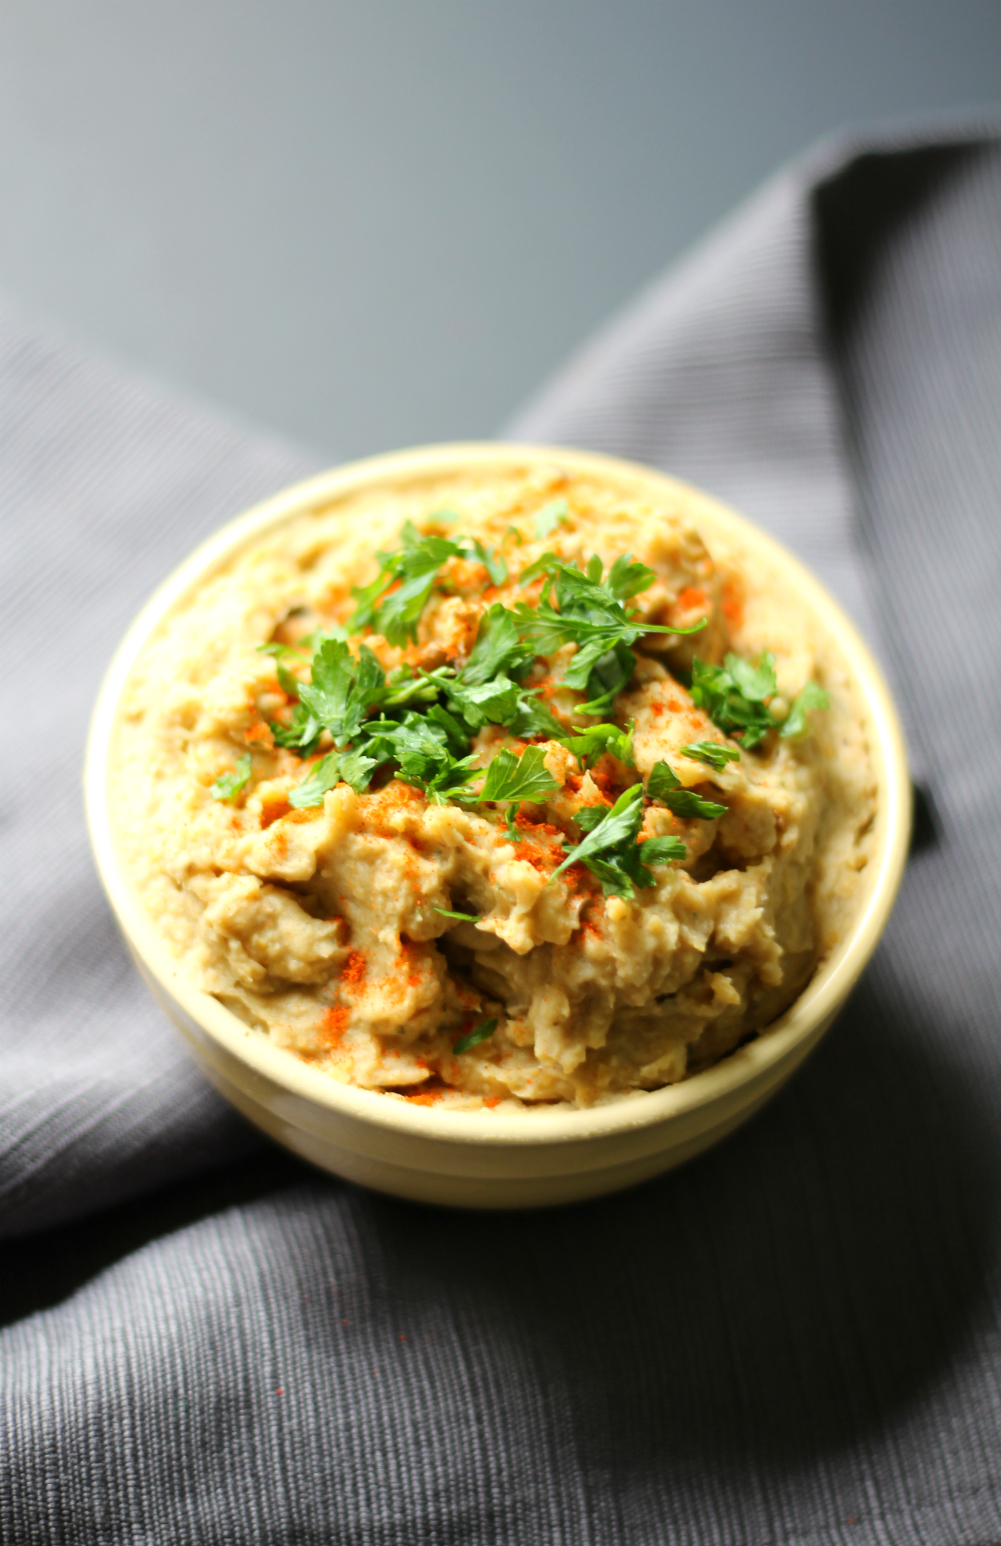 Baba Ghanoush Hummus | Strength and Sunshine @RebeccaGF666 Combine 2 of the best dip recipes to make Baba Ghanoush Hummus! Full of deep, smoky, and roasted flavors, this condiment will seem like a meal! Gluten-free, vegan, and nut-free, with eggplant and chickpeas, you'll get your healthy veggies and protein in one dip!